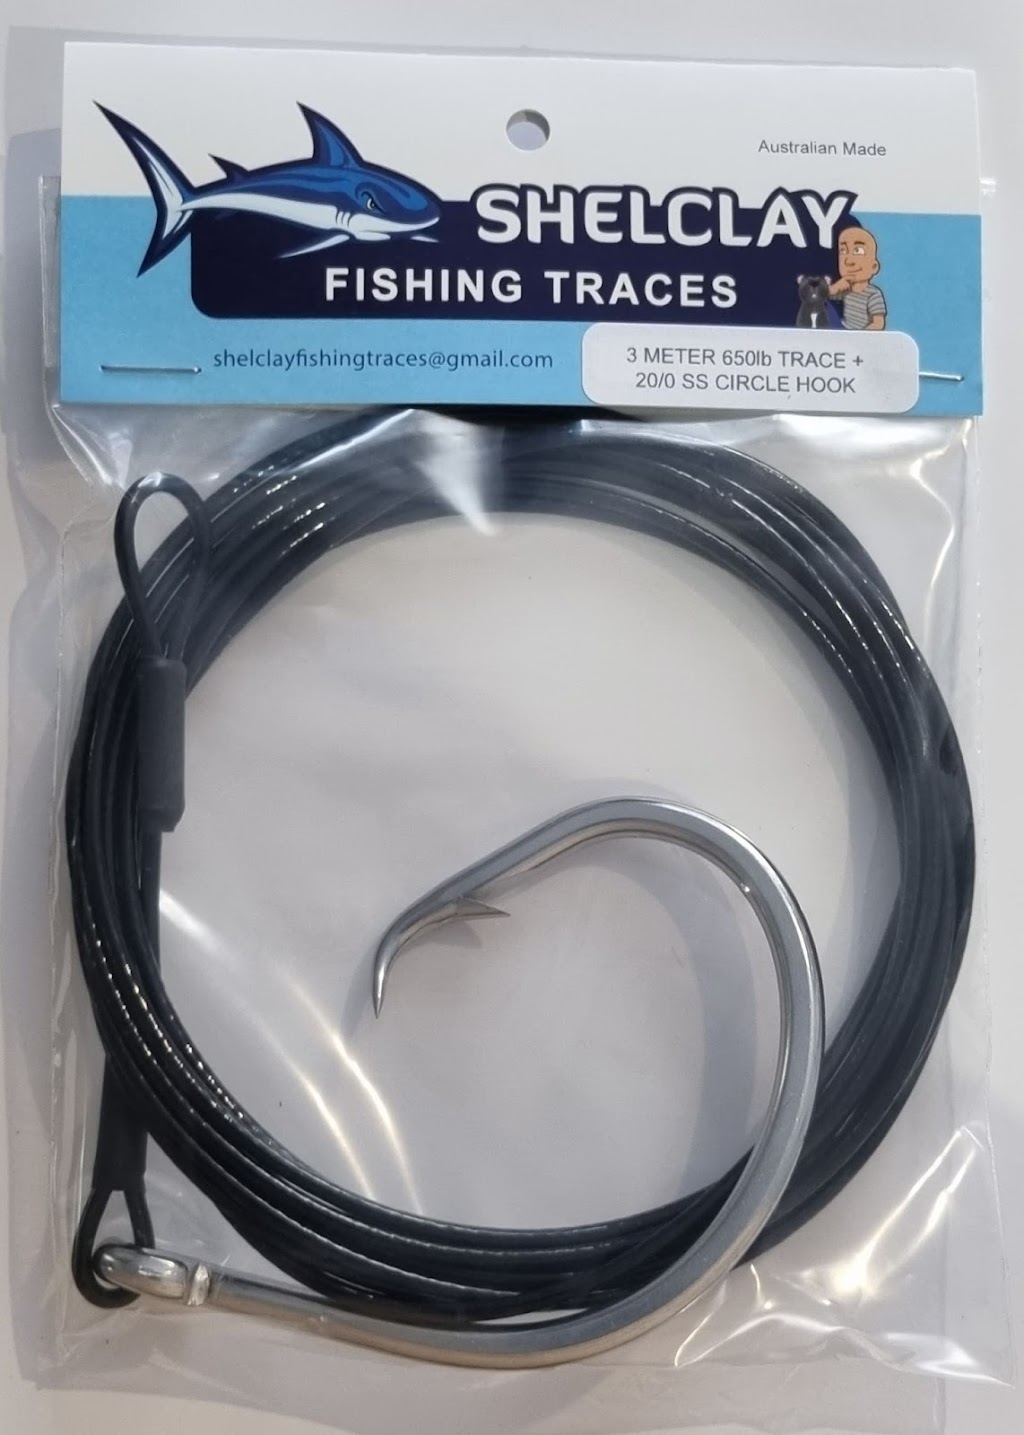 Shelclay Fishing Traces | store | Bowarrady Ct, River Heads QLD 4655, Australia | 0431770929 OR +61 431 770 929